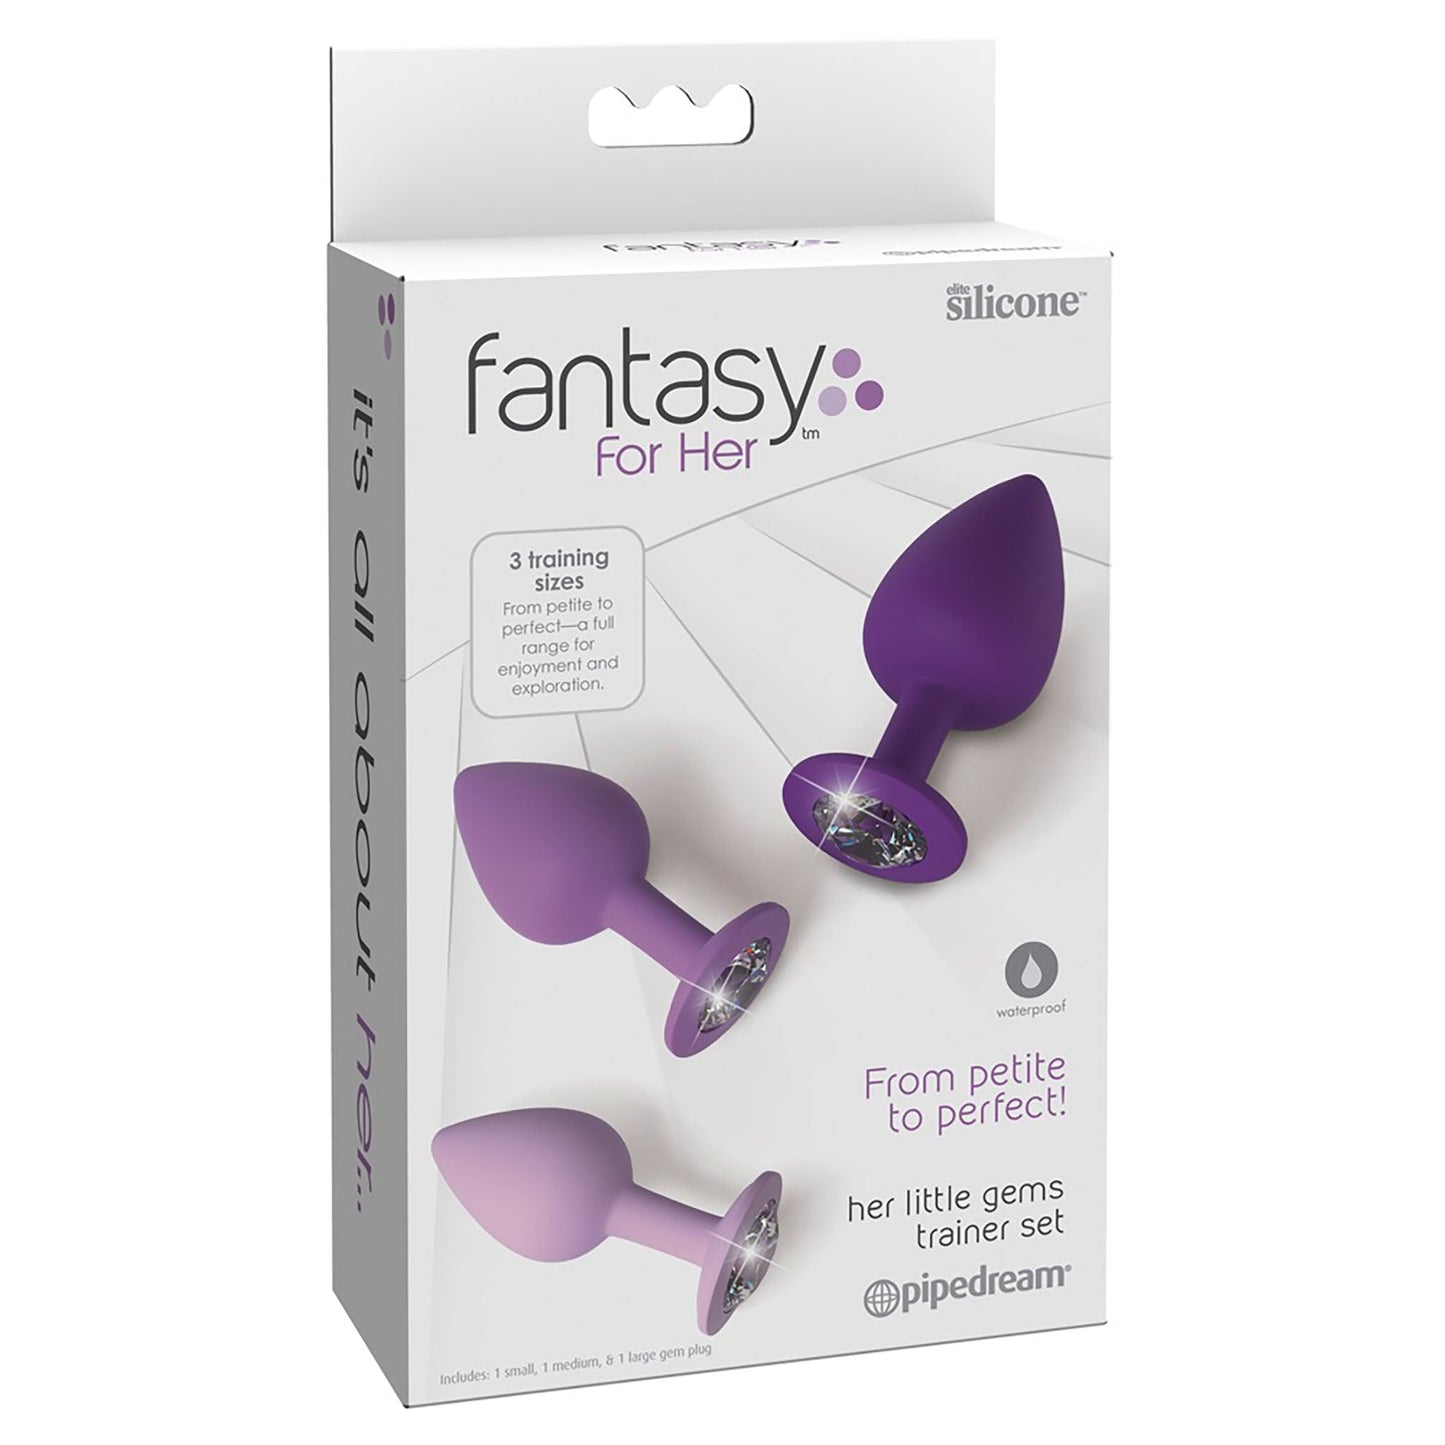 Her little Gems Trainer Set Anal Plugs, Verpackung